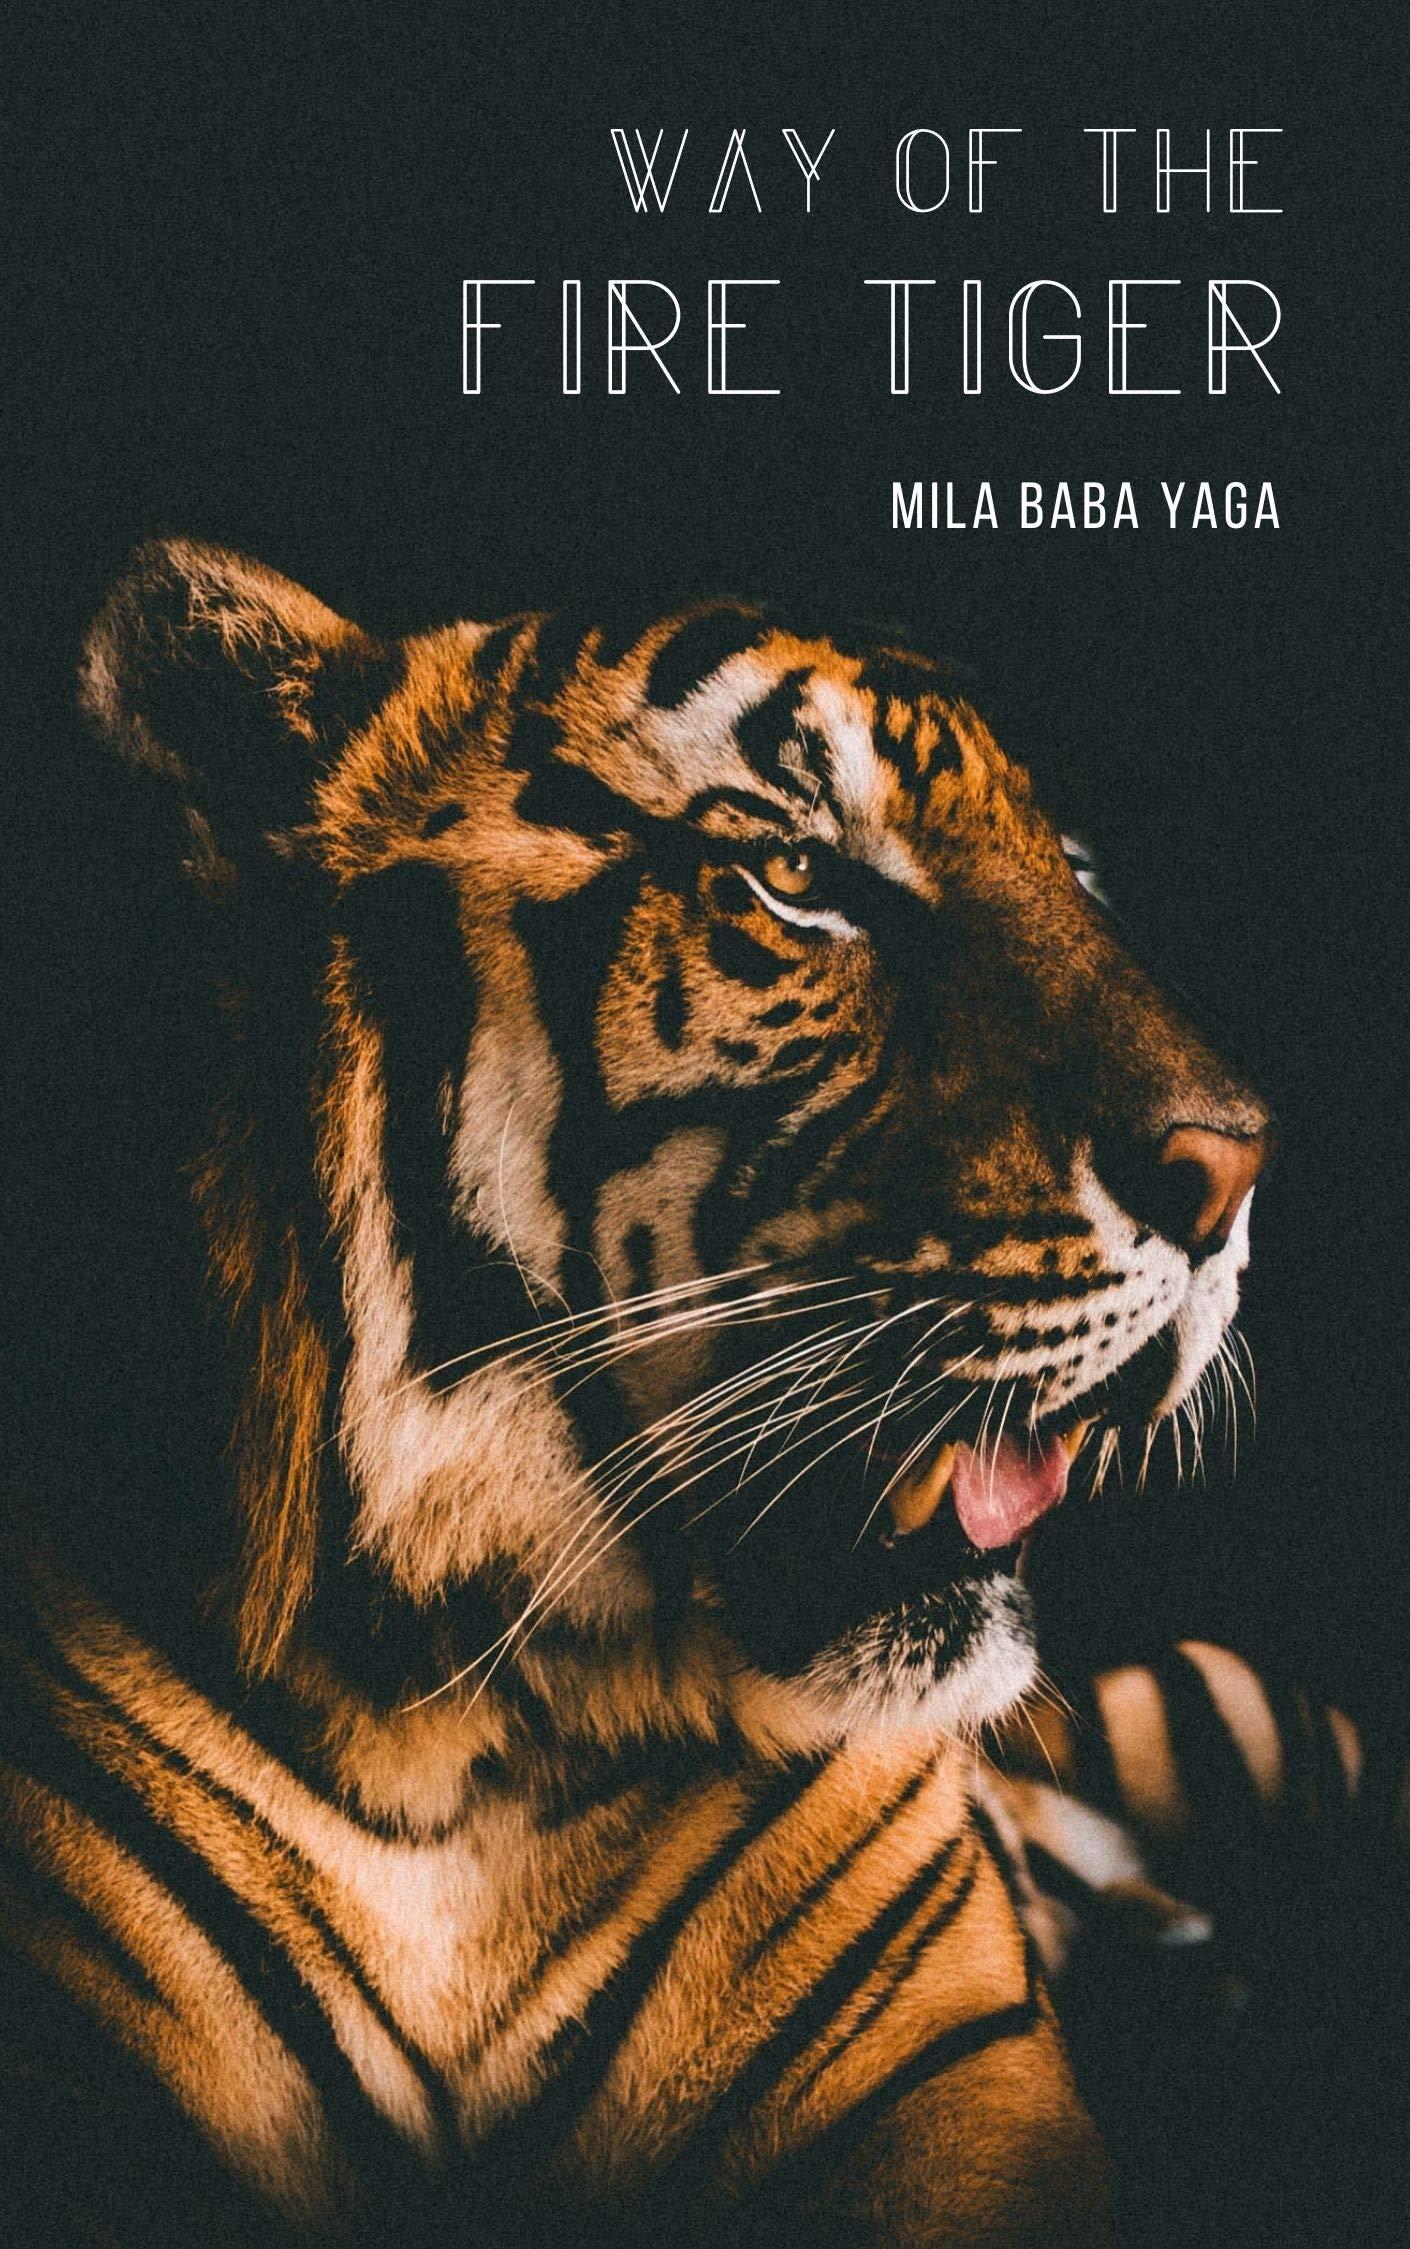 Way Of The Fire Tiger by Mila Baba Yaga Goodreads